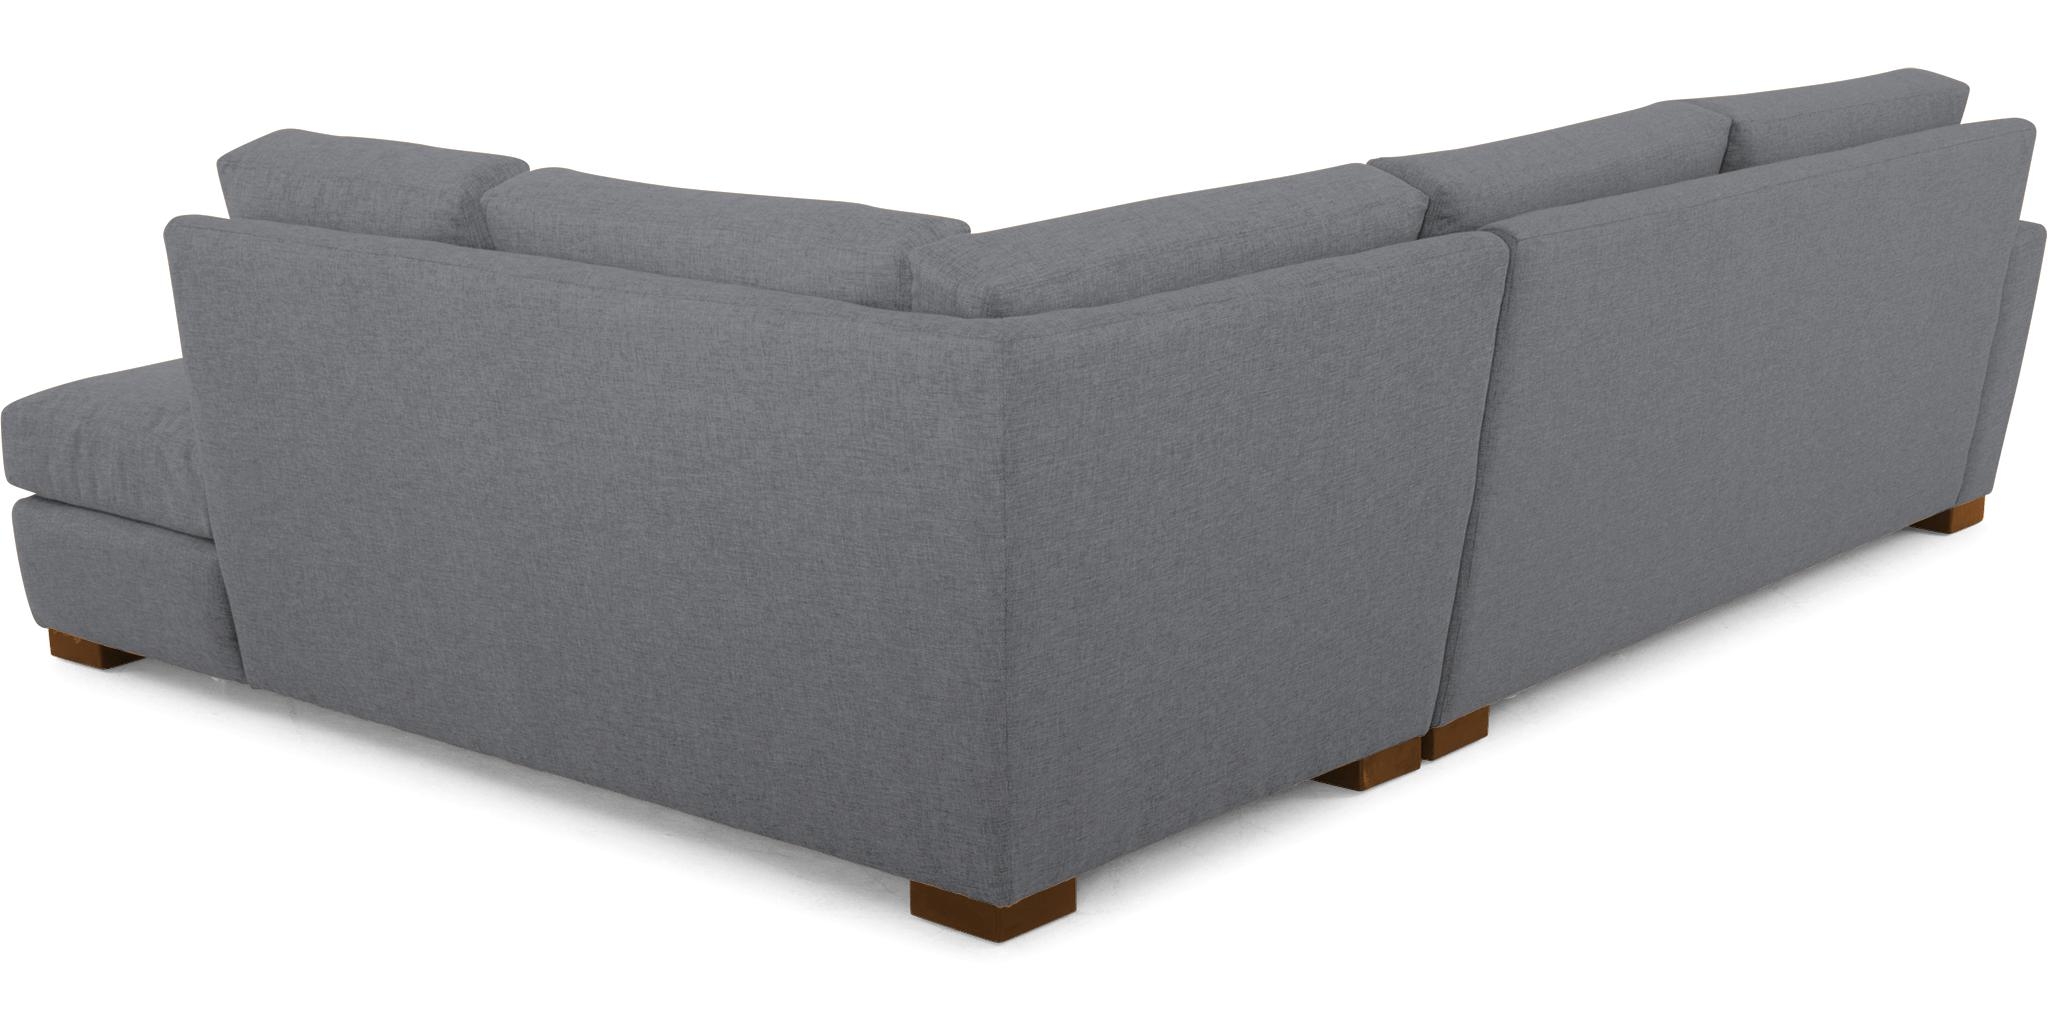 Gray Anton Mid Century Modern Sectional with Bumper - Essence Ash - Mocha - Right  - Image 4